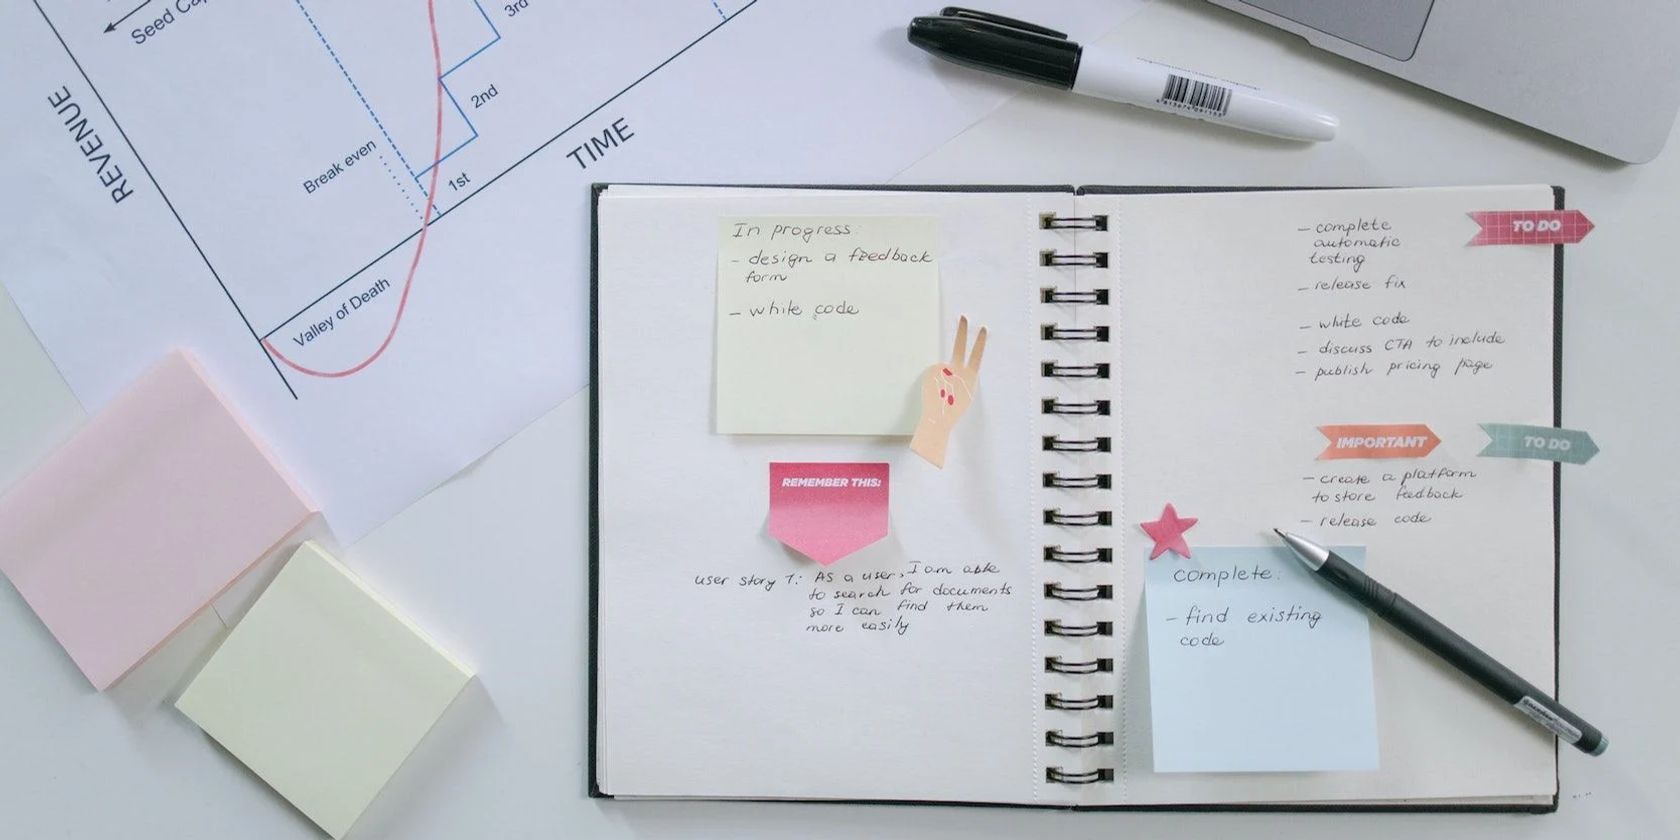 An open notebook with a to-do list